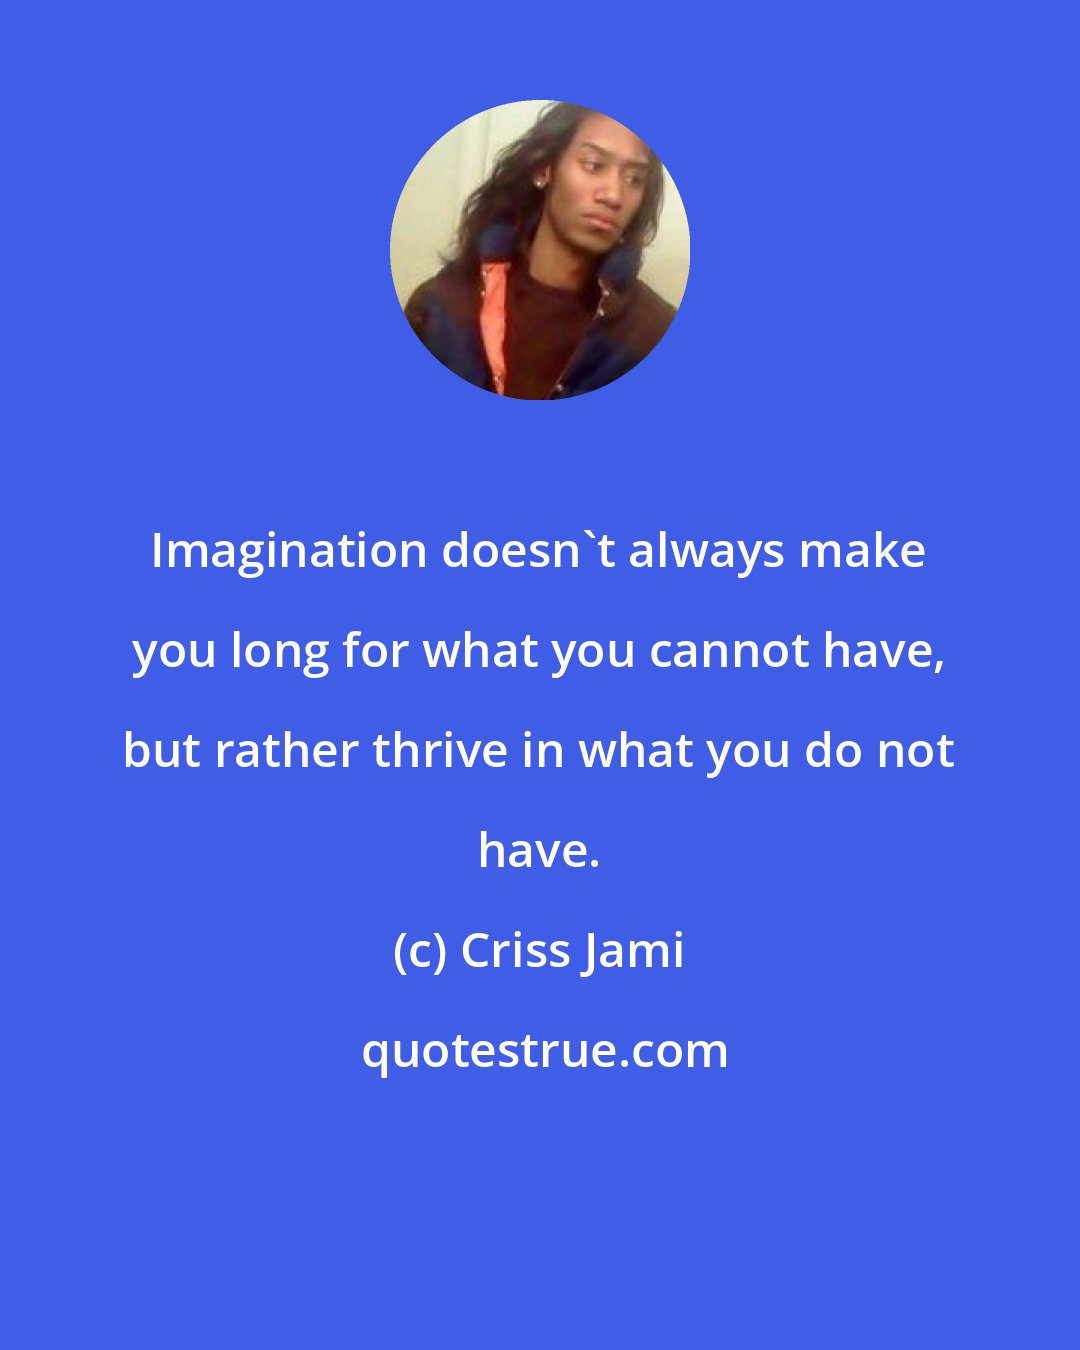 Criss Jami: Imagination doesn't always make you long for what you cannot have, but rather thrive in what you do not have.